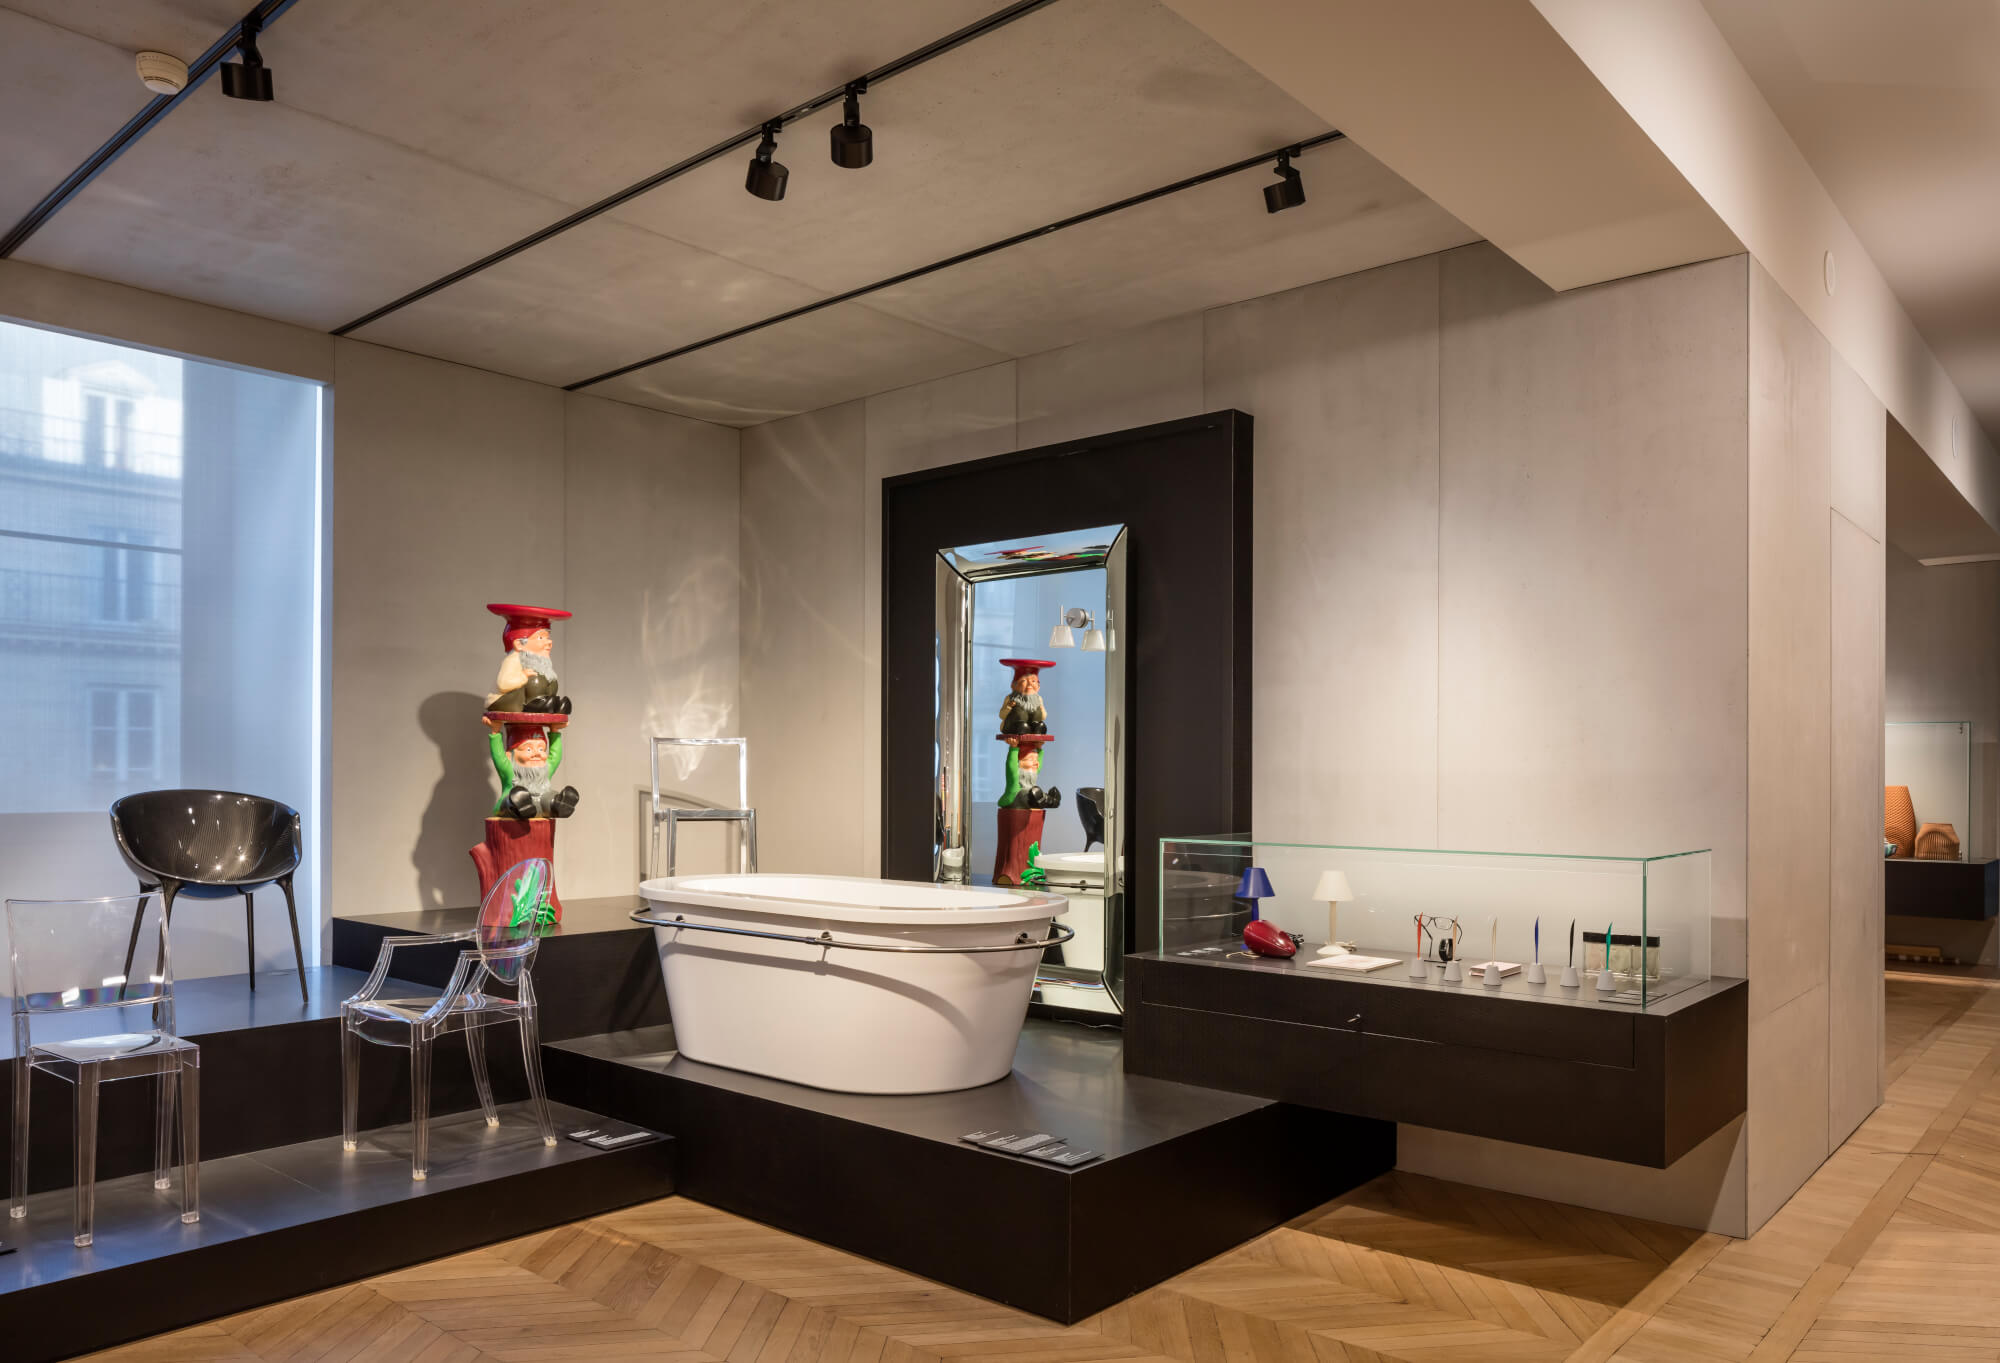 “PHILIPPE STARCK & DESIGN FOR EVERYONE” AT MAD  - 